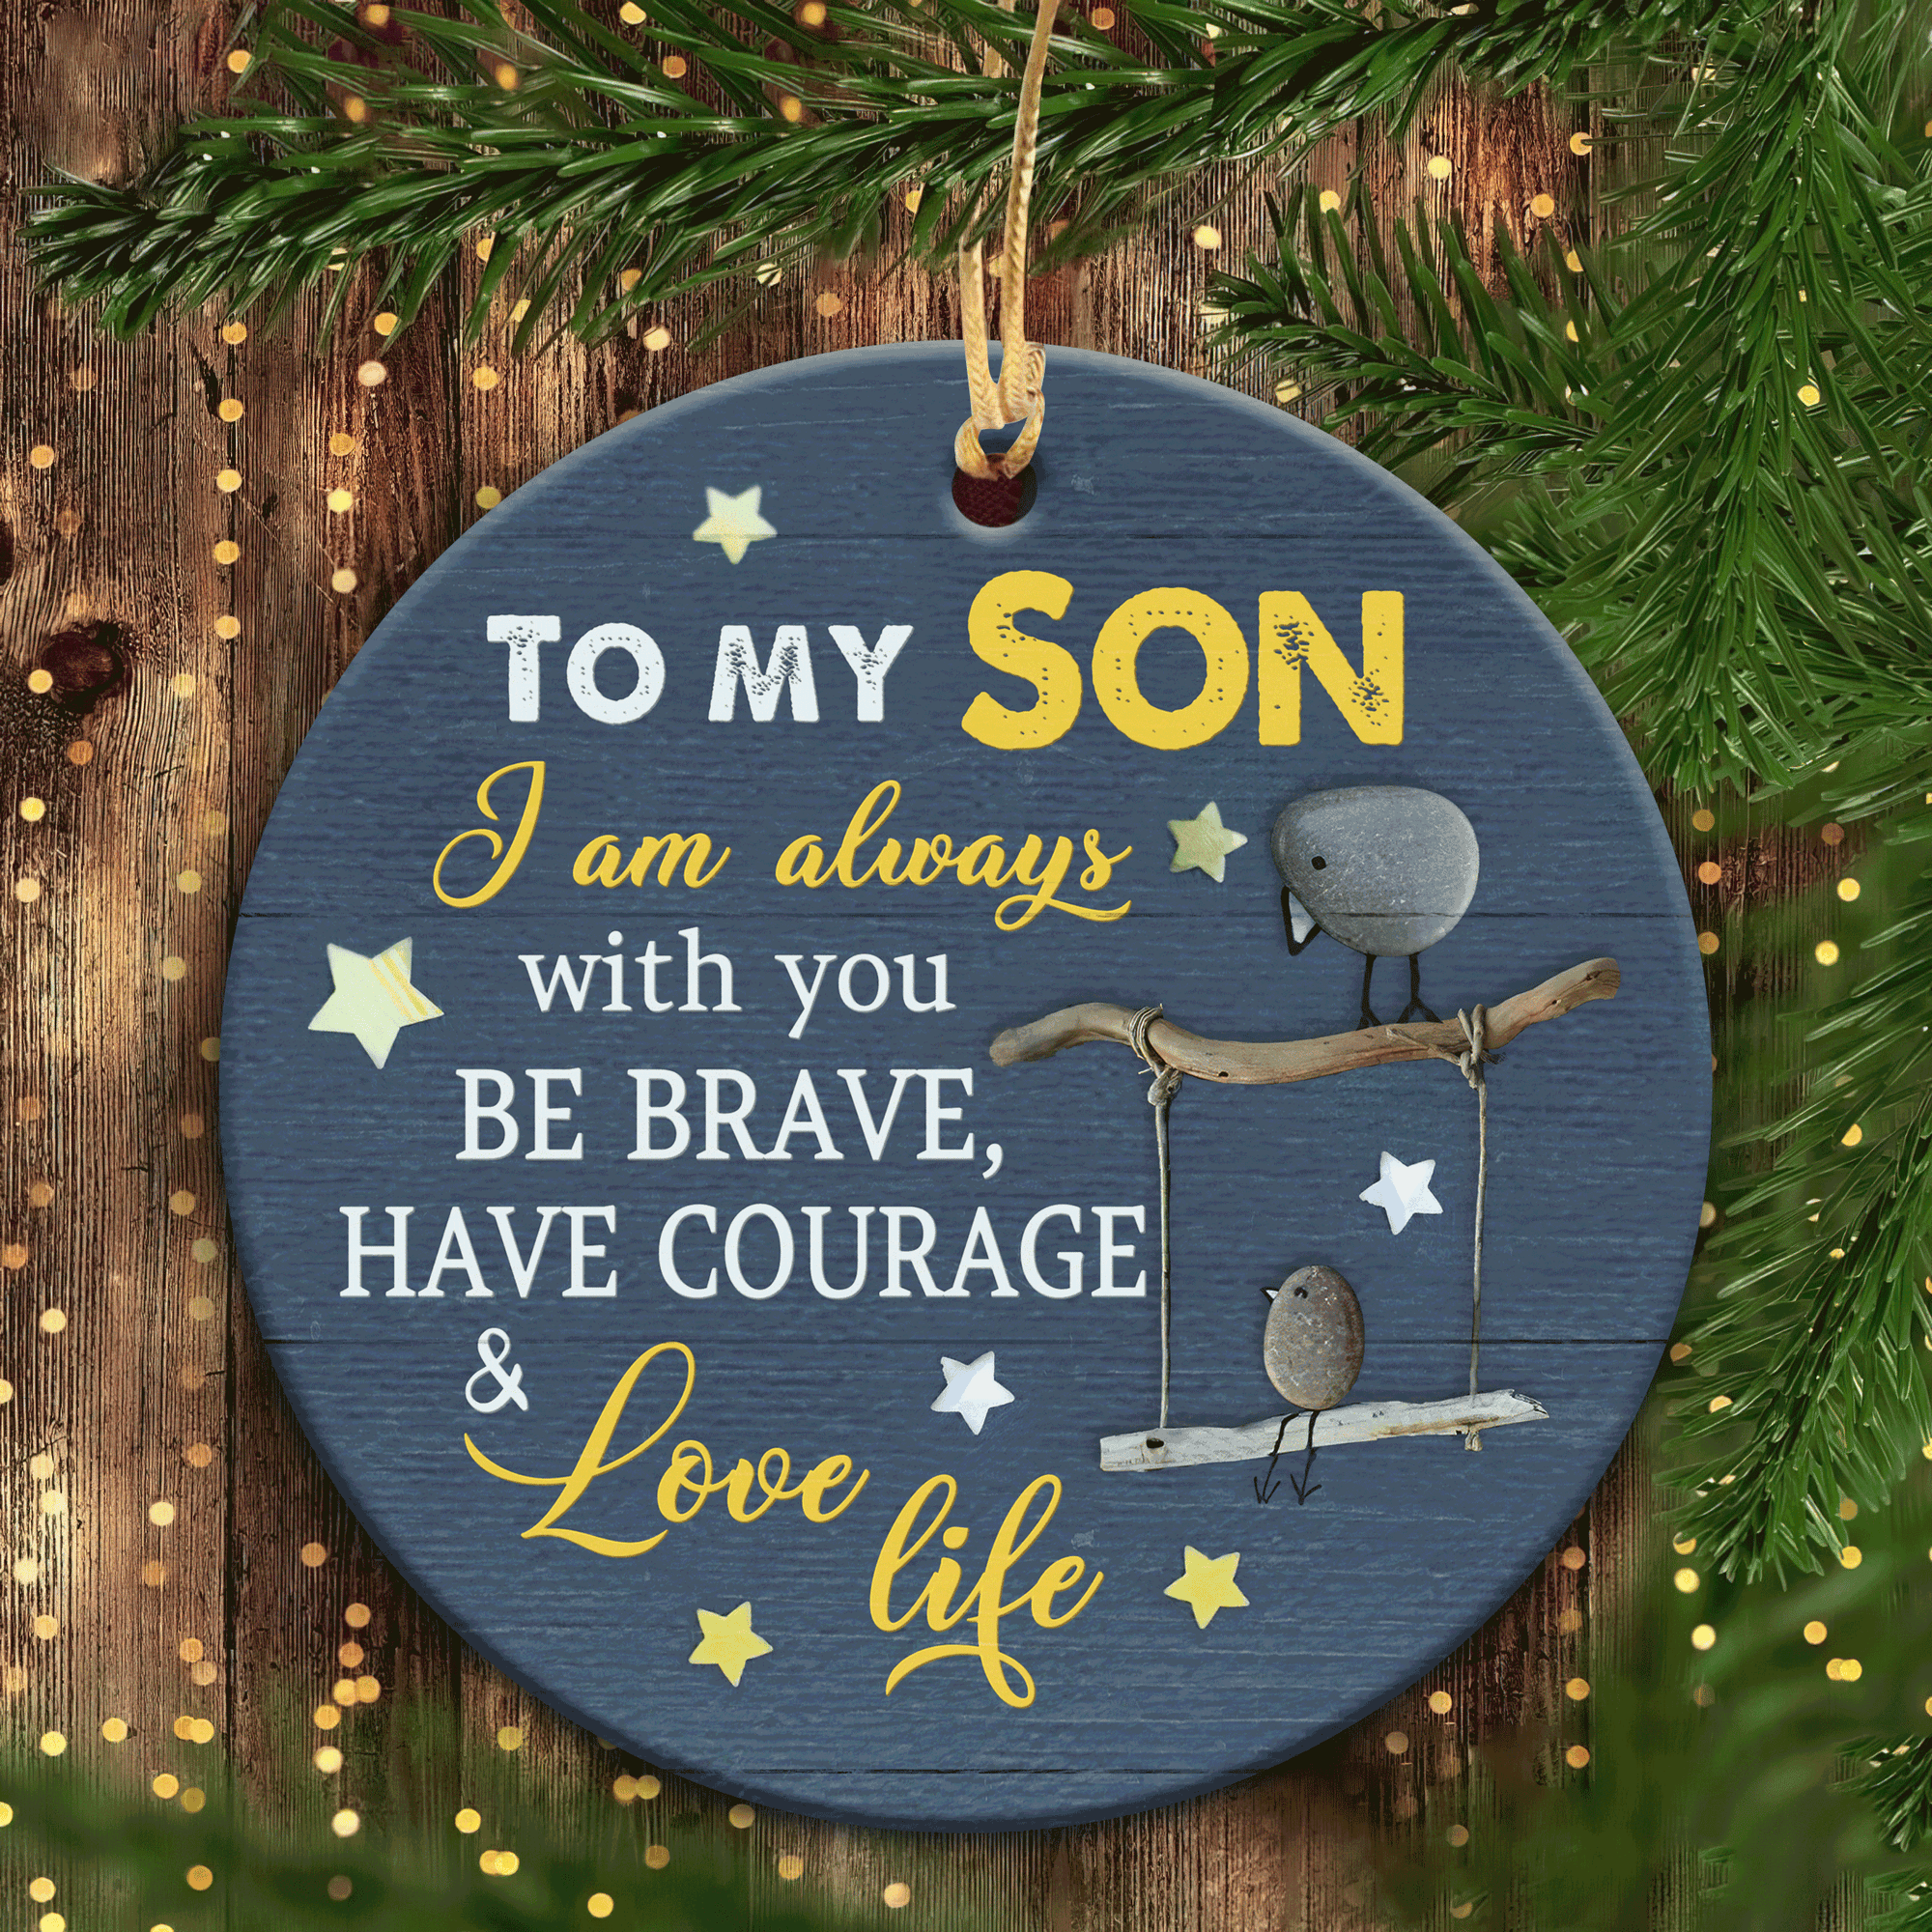 Best Christmas Gifts, Birthday Gifts For Son, Christmas Family Ceramic Ornaments, Family Bird Ornaments, To My Son Be Brave, Have Courage